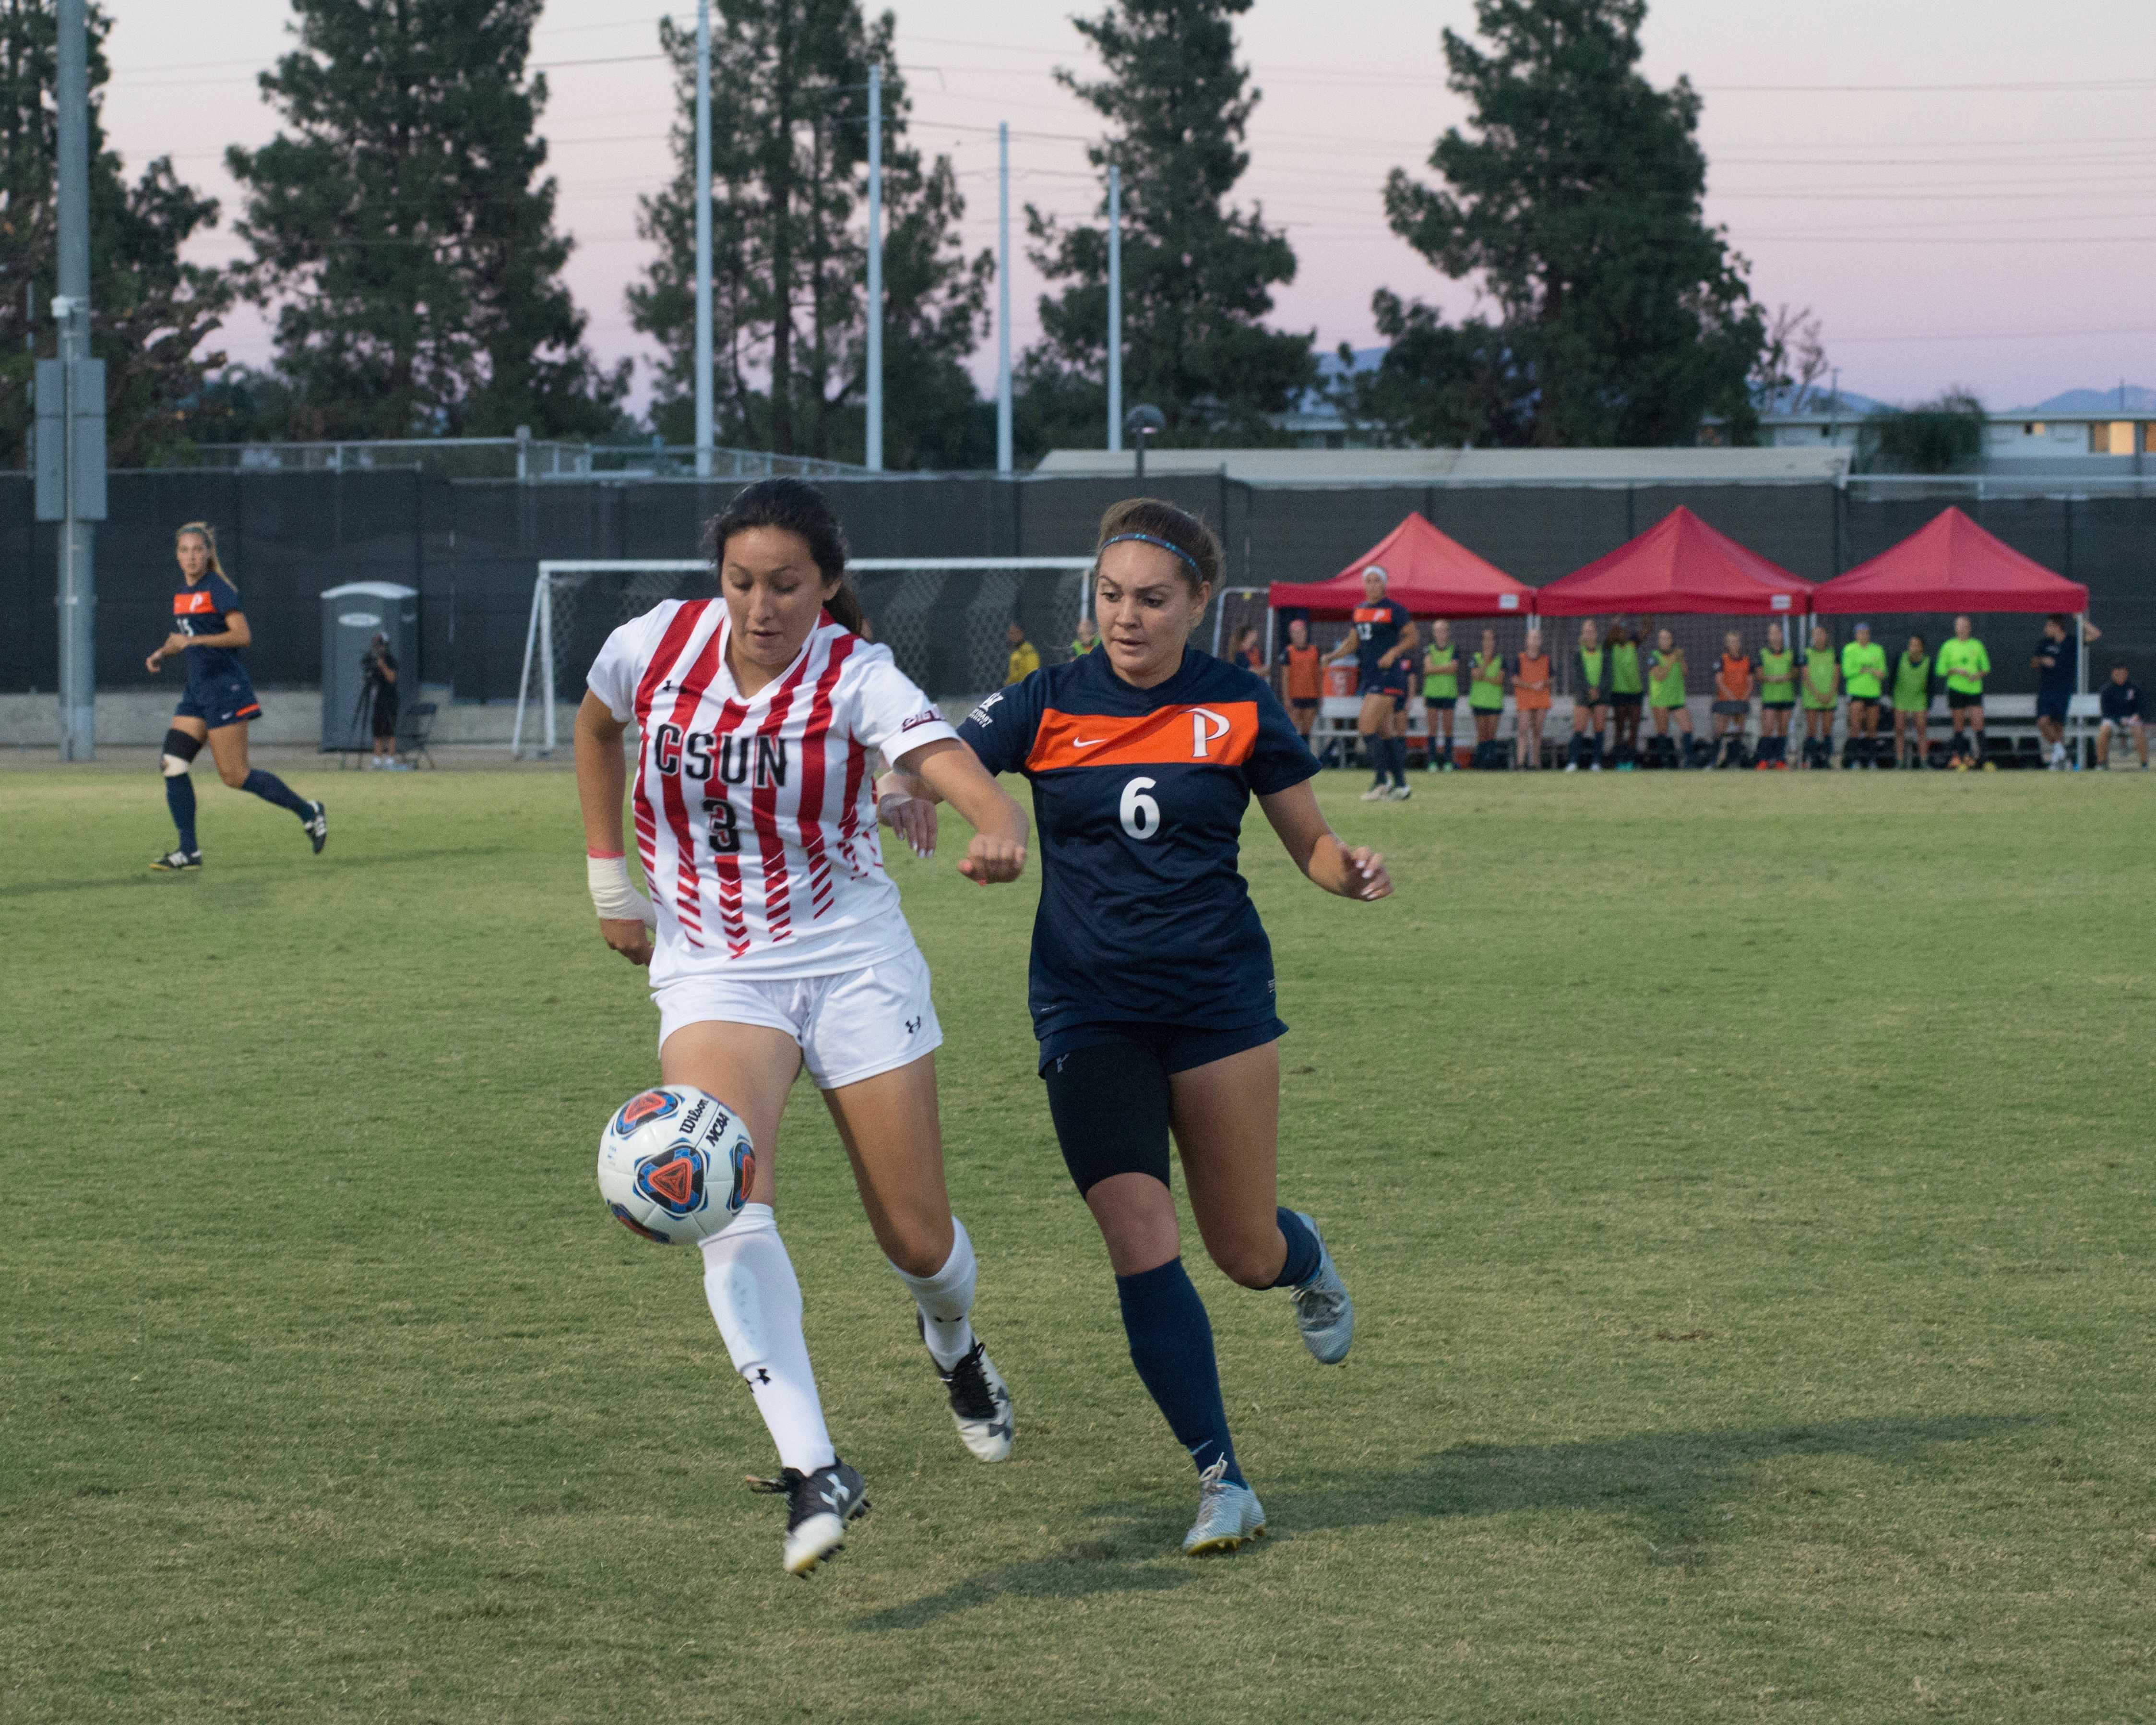 CSUN tries to get control of the ball